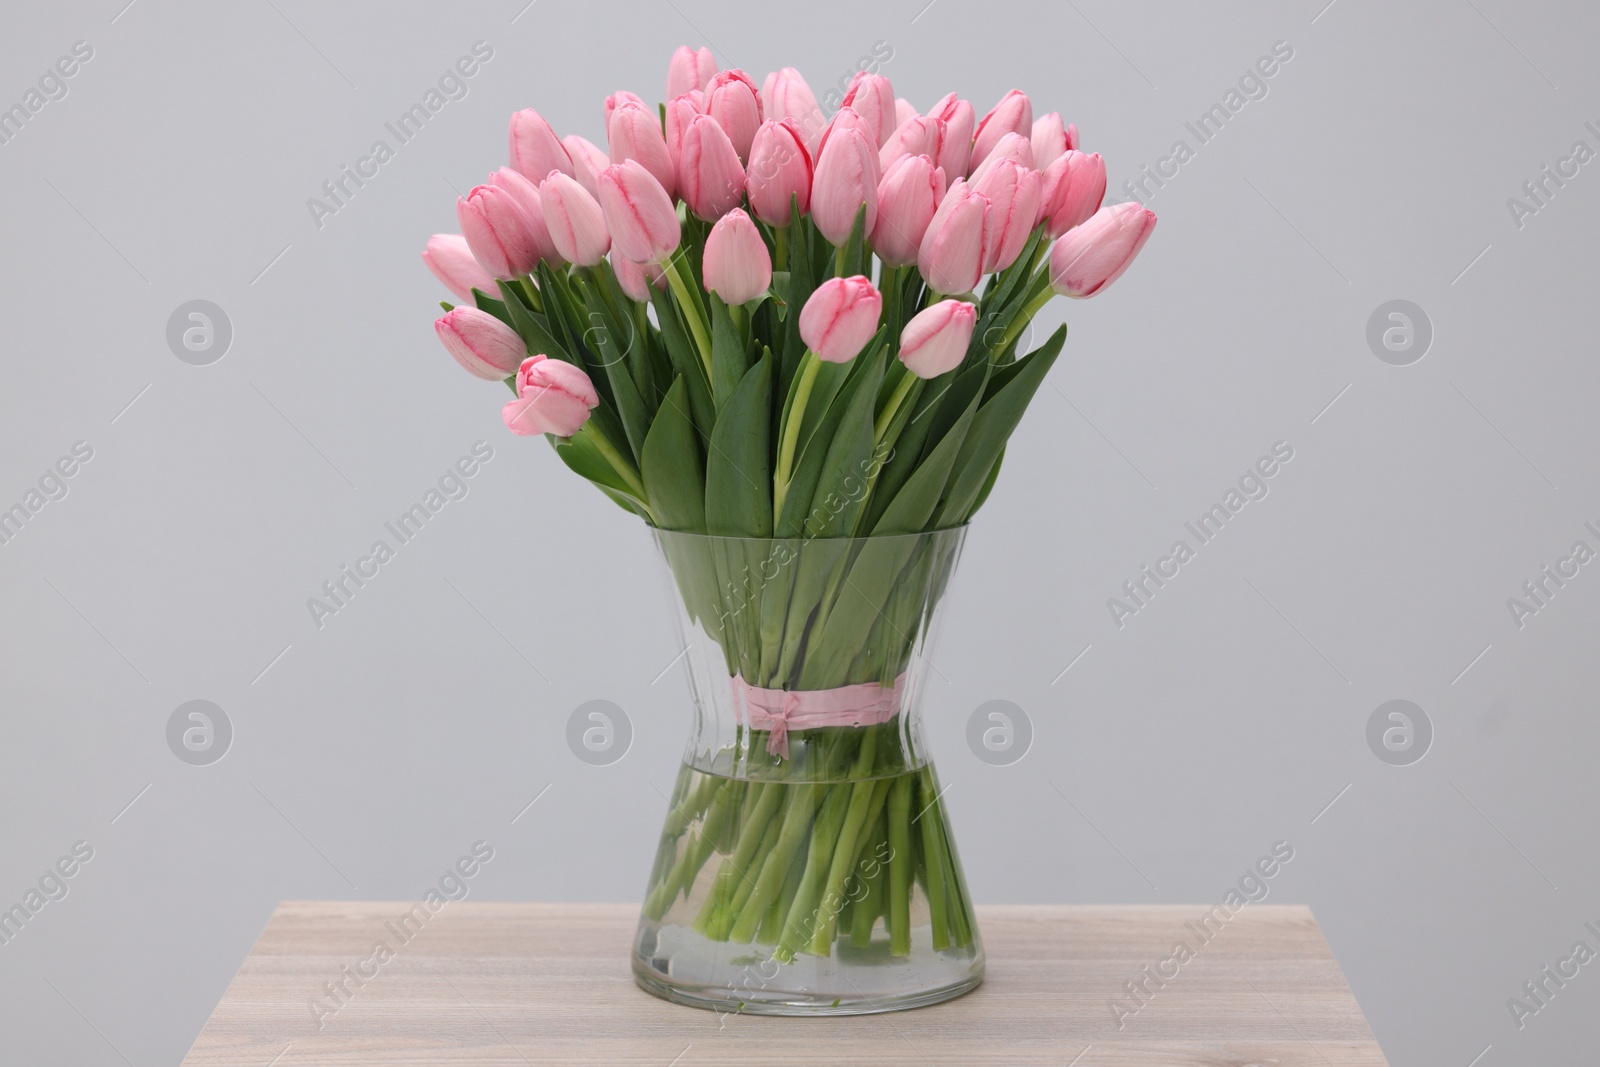 Photo of Bouquet of beautiful pink tulips in vase on wooden table against grey background